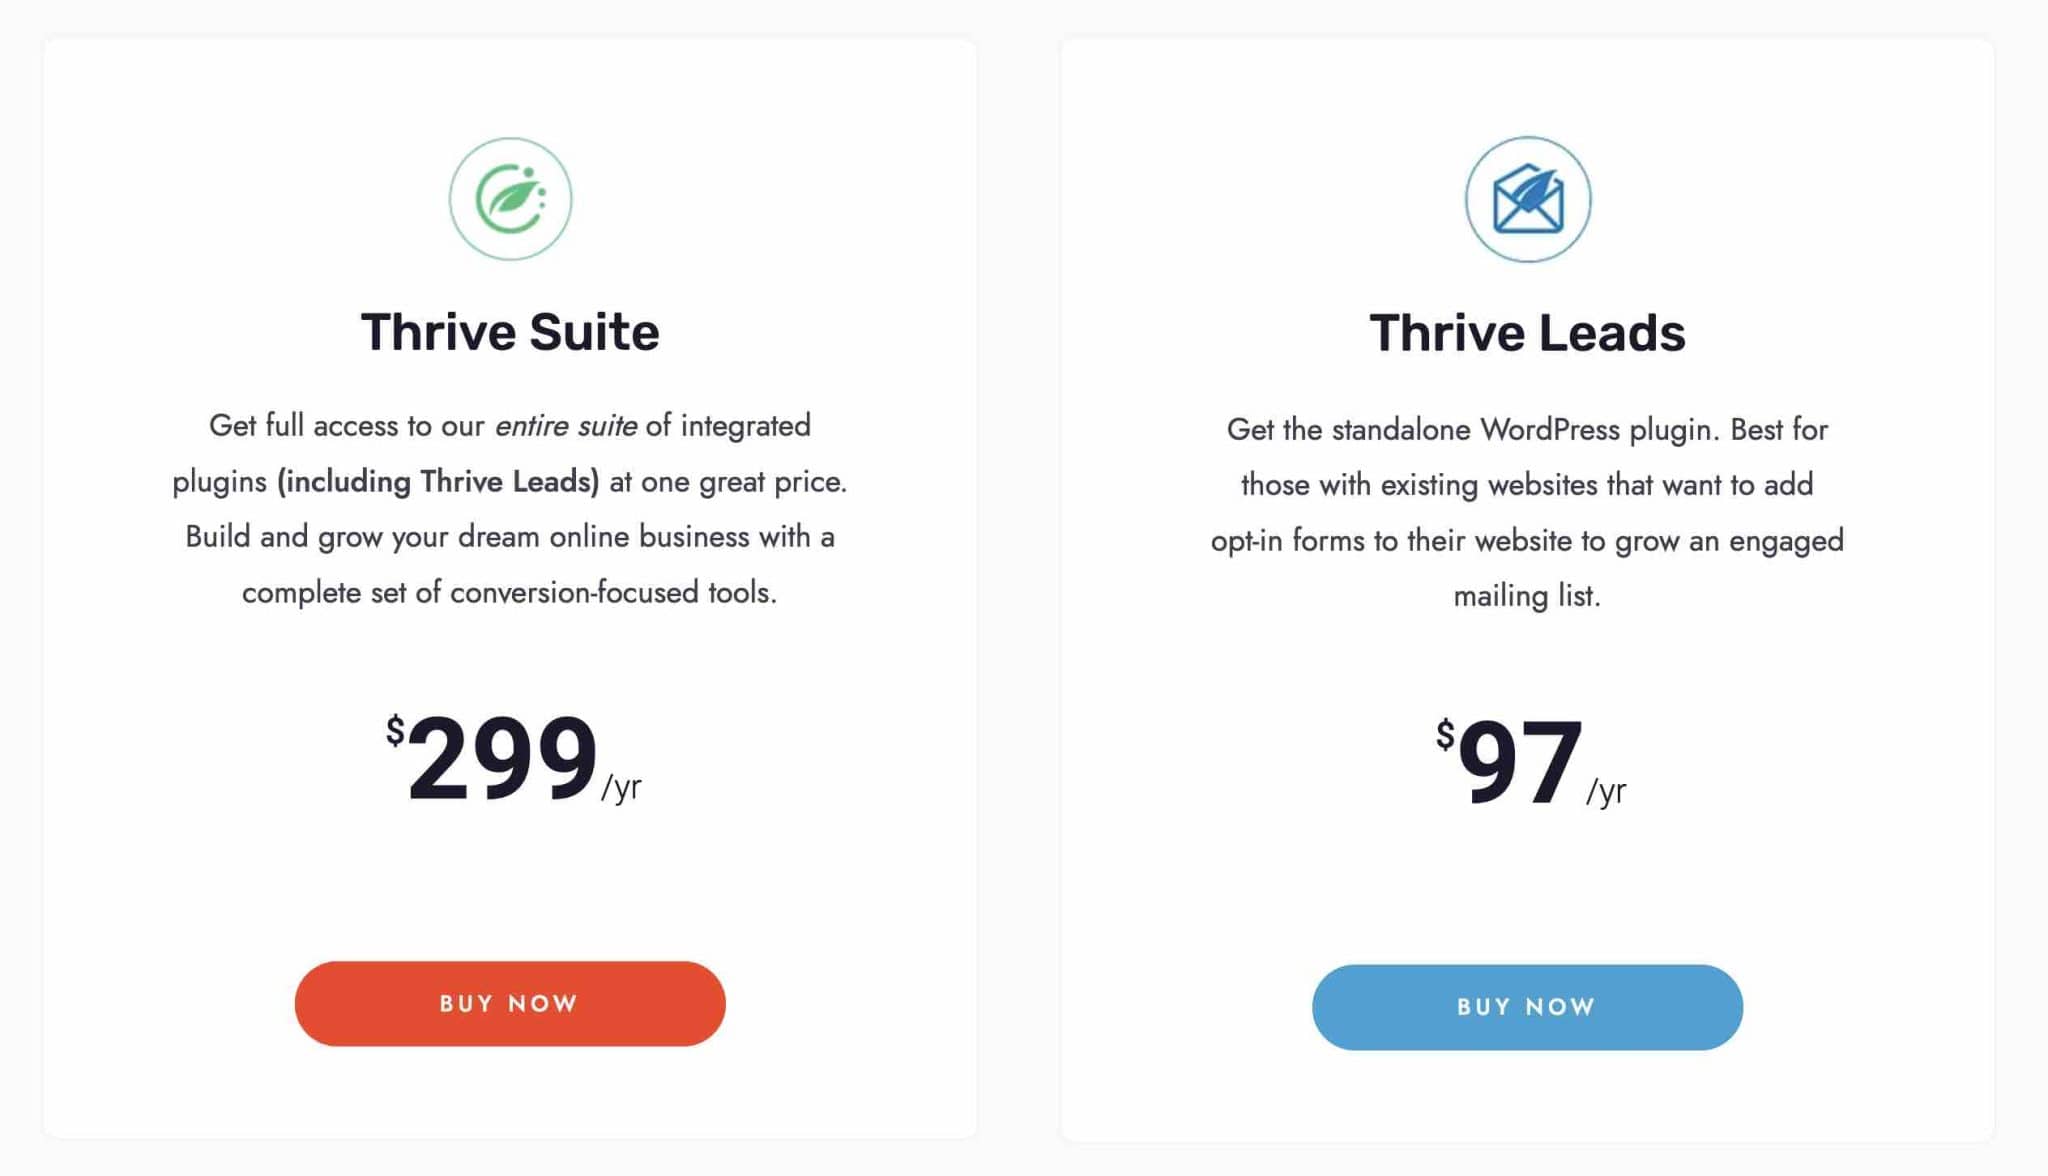 Thrive Suite and Thrive Leads prices.